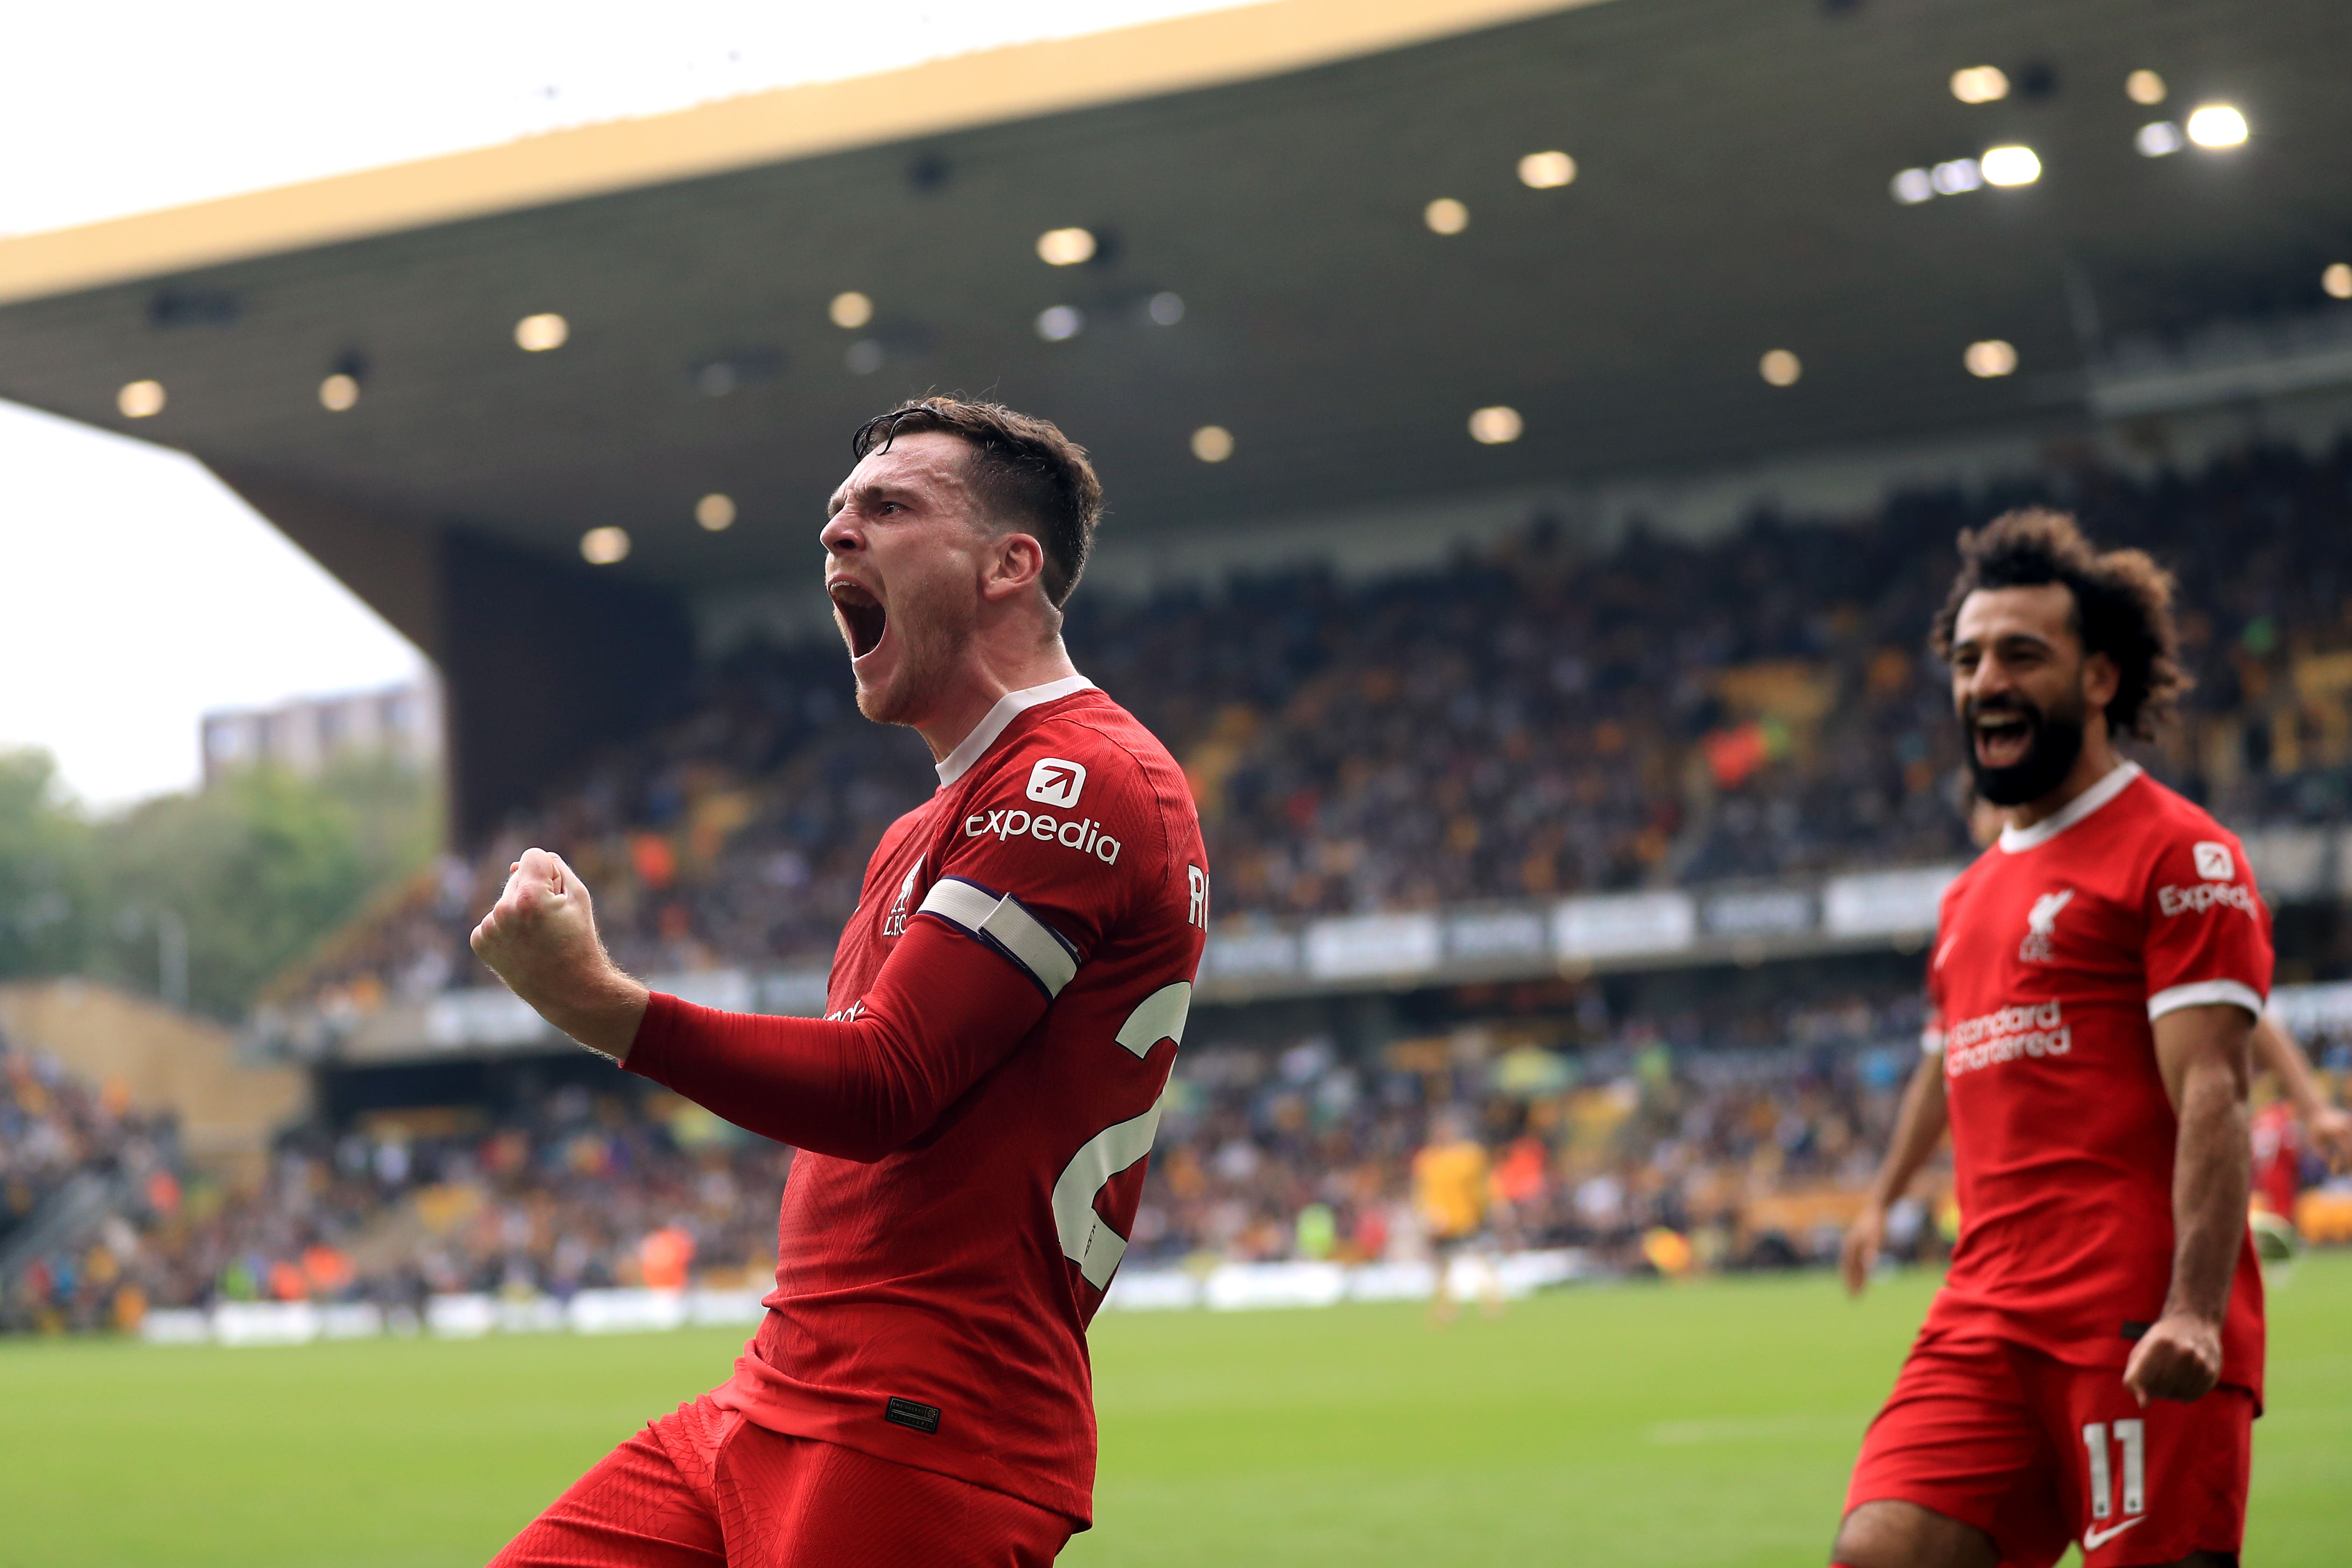 Robertson scored Liverpool’s second goal in a comeback win at Wolves